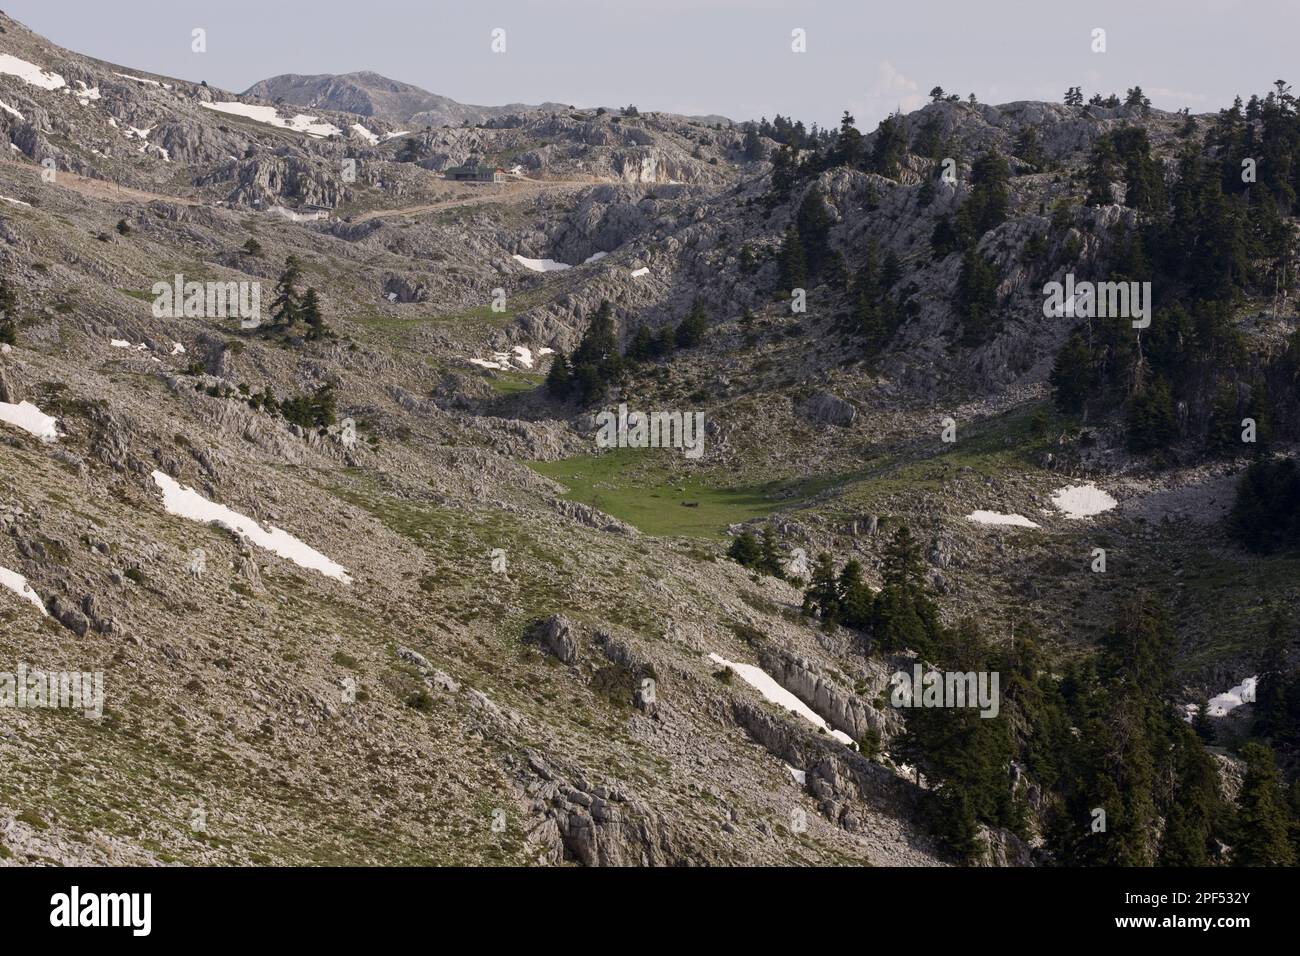 View of a karst limestone landscape with trees of the Greek greek fir (Abies cephalonica), at 1700m, Mount Parnassus, Mount Parnassus N. P. Greece Stock Photo